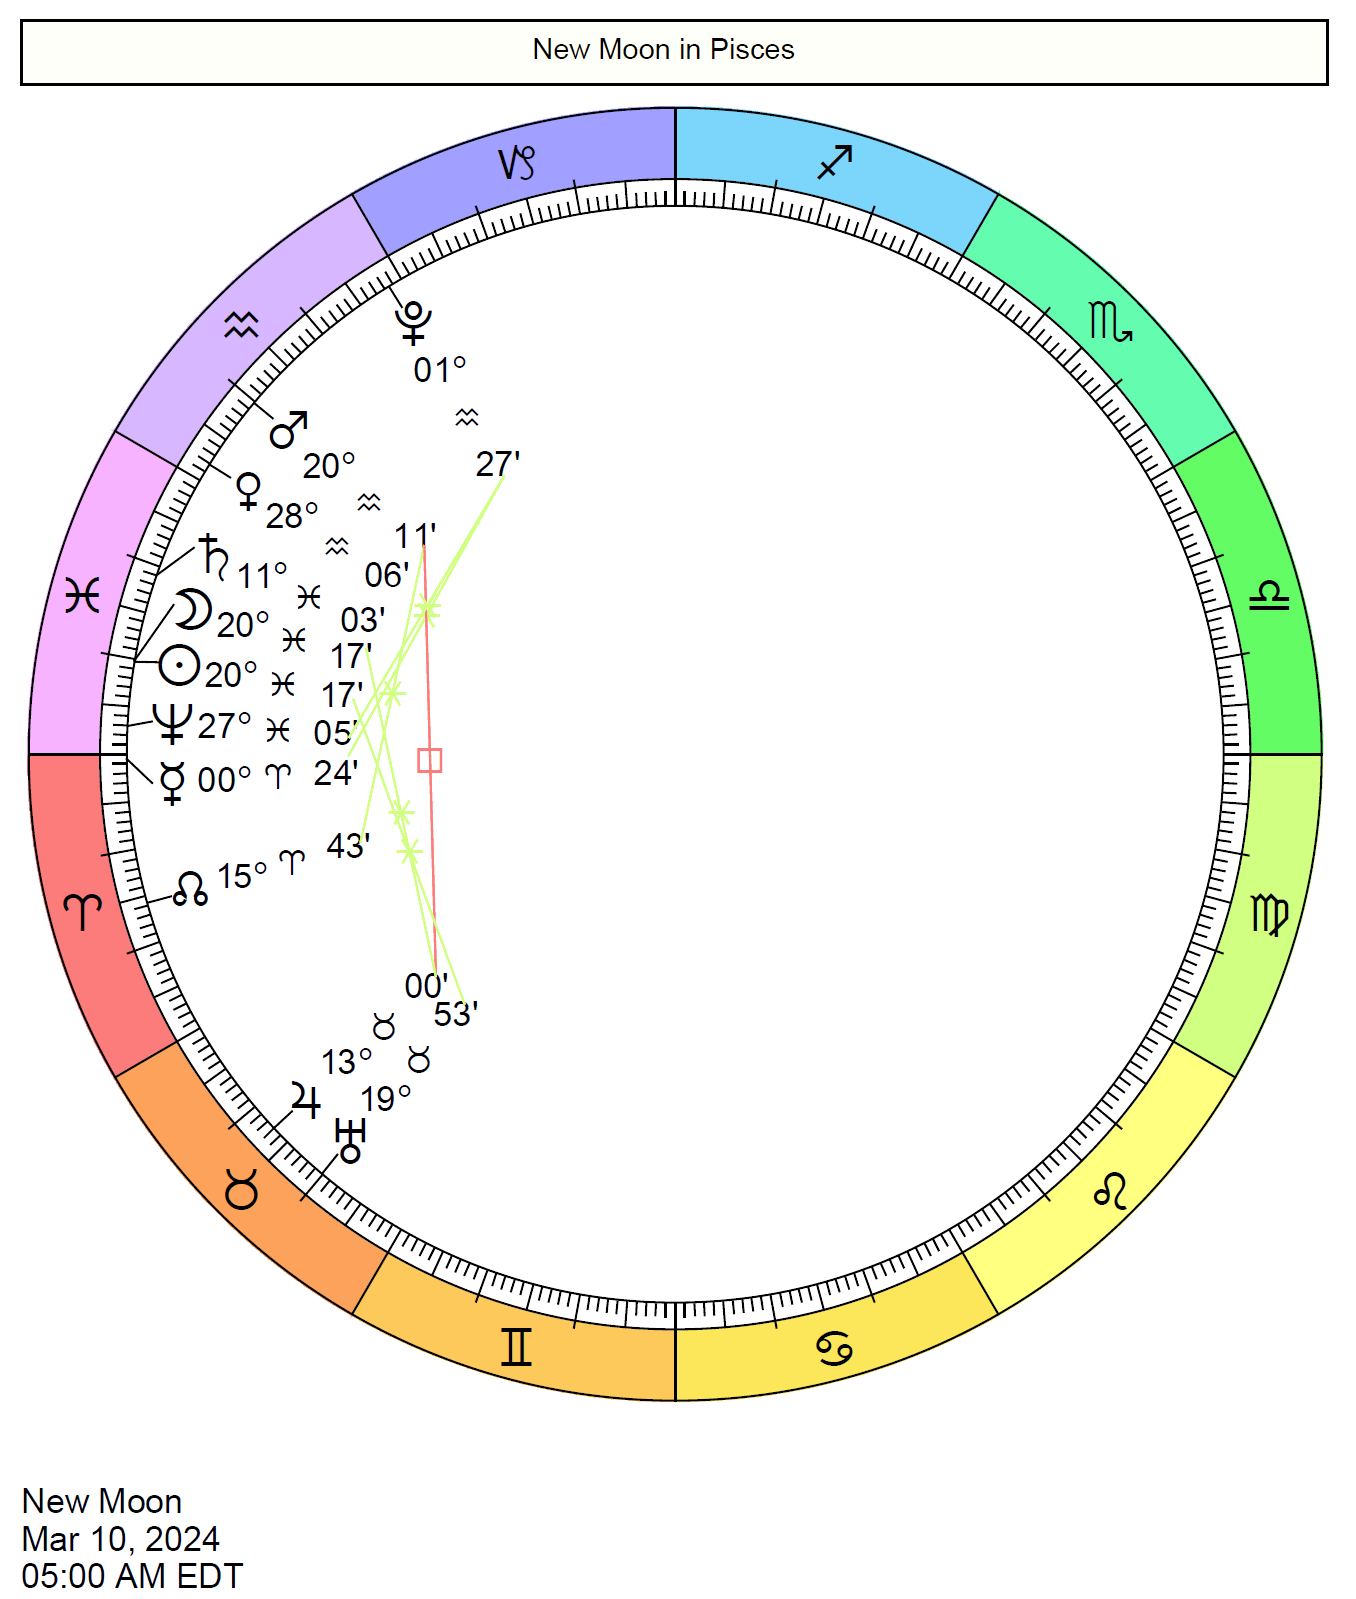 Chart wheel shows the Sun and Moon in alignment in the sign of Pisces